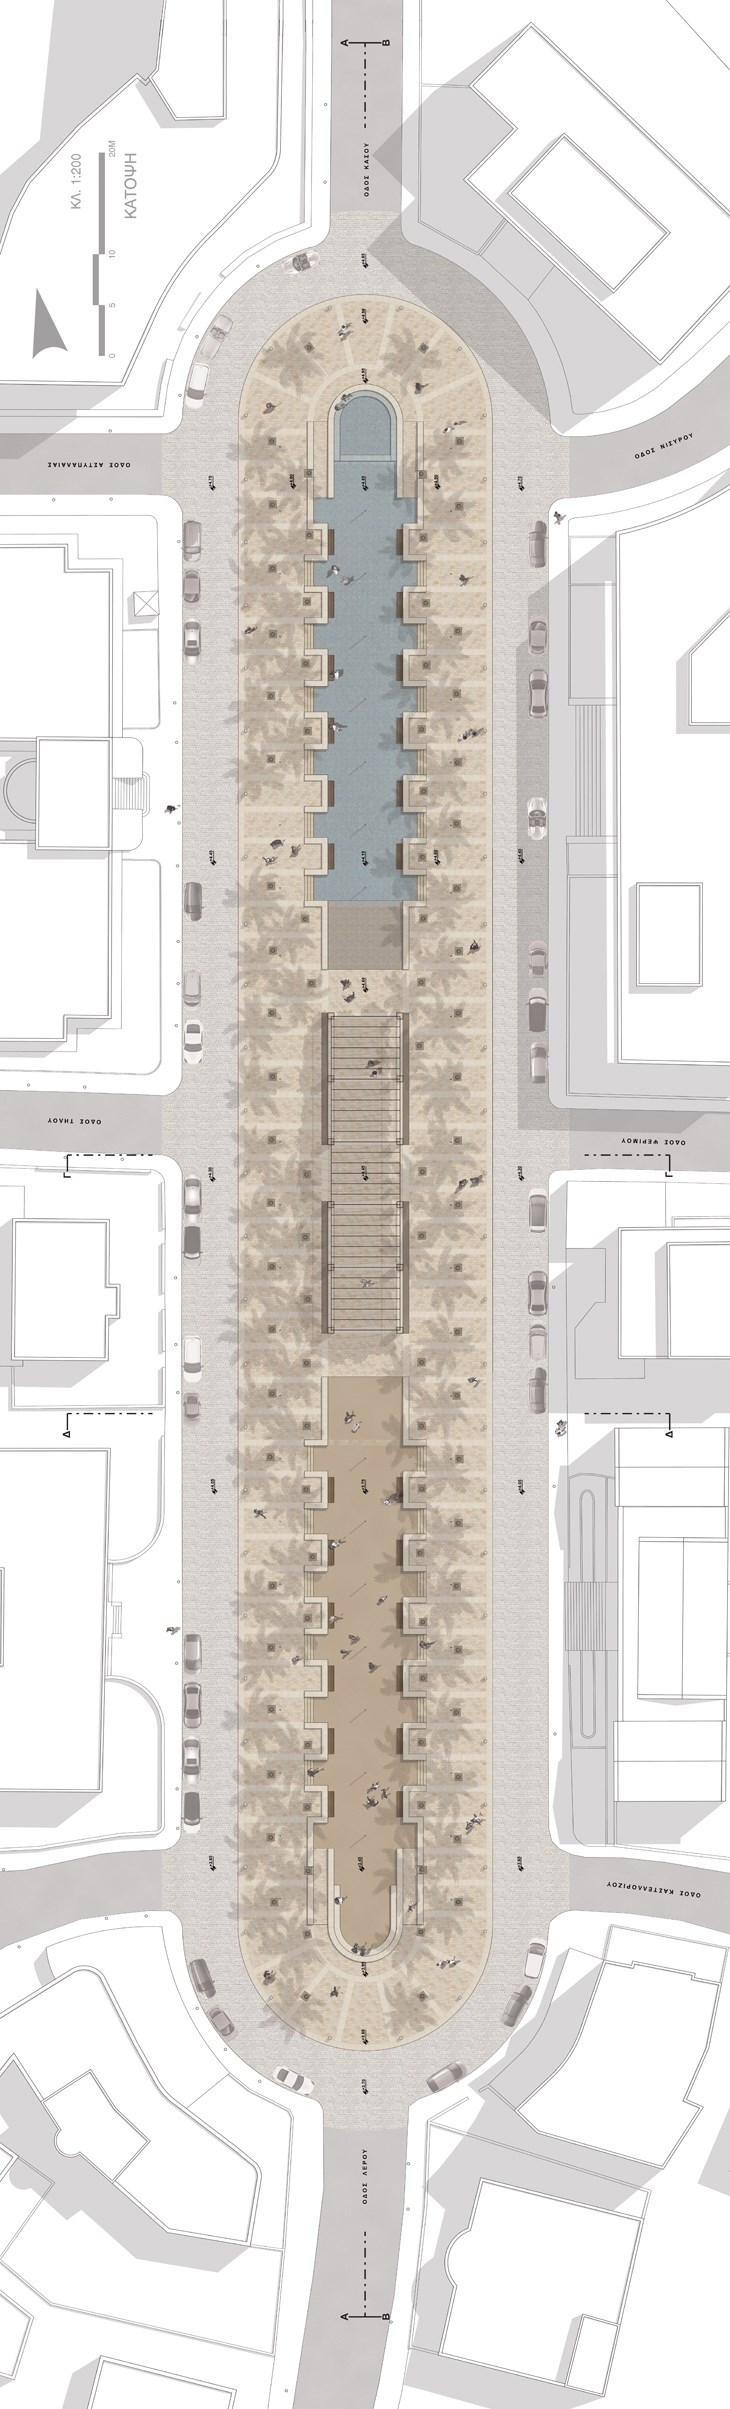 Archisearch 2nd Prize at the Panhellenic Competition for the Reconstruction of Charitou Sq. in Rhodes / V. Vassilopoulos